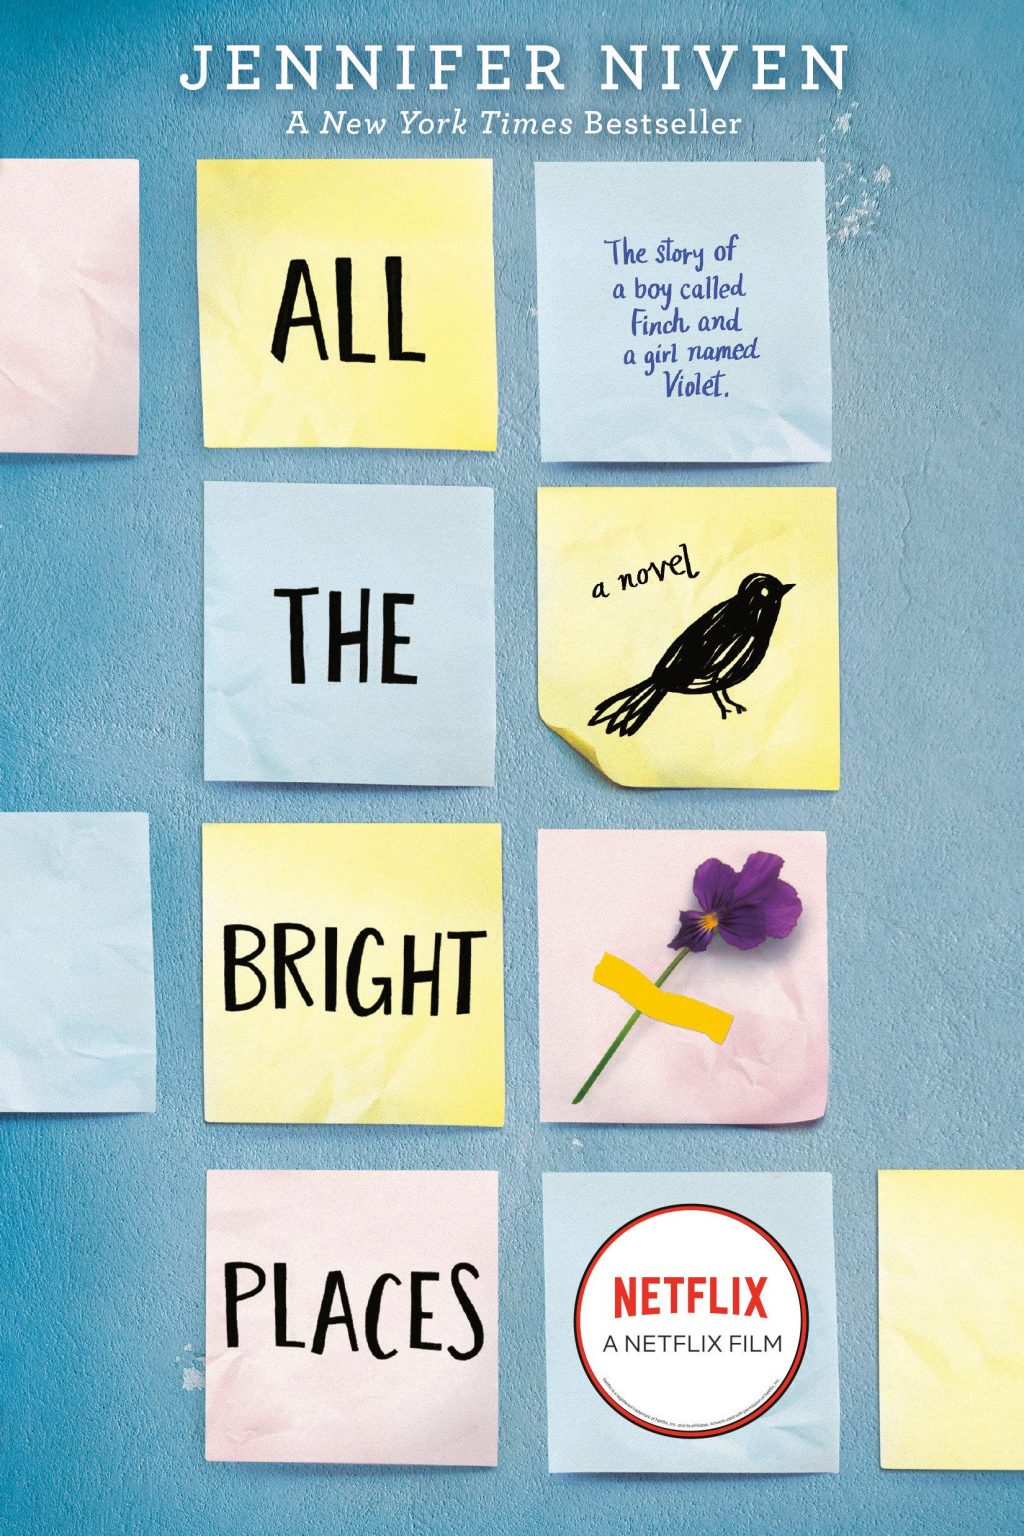 15 Best Young Adult Novels That Every New Reader Should Read!